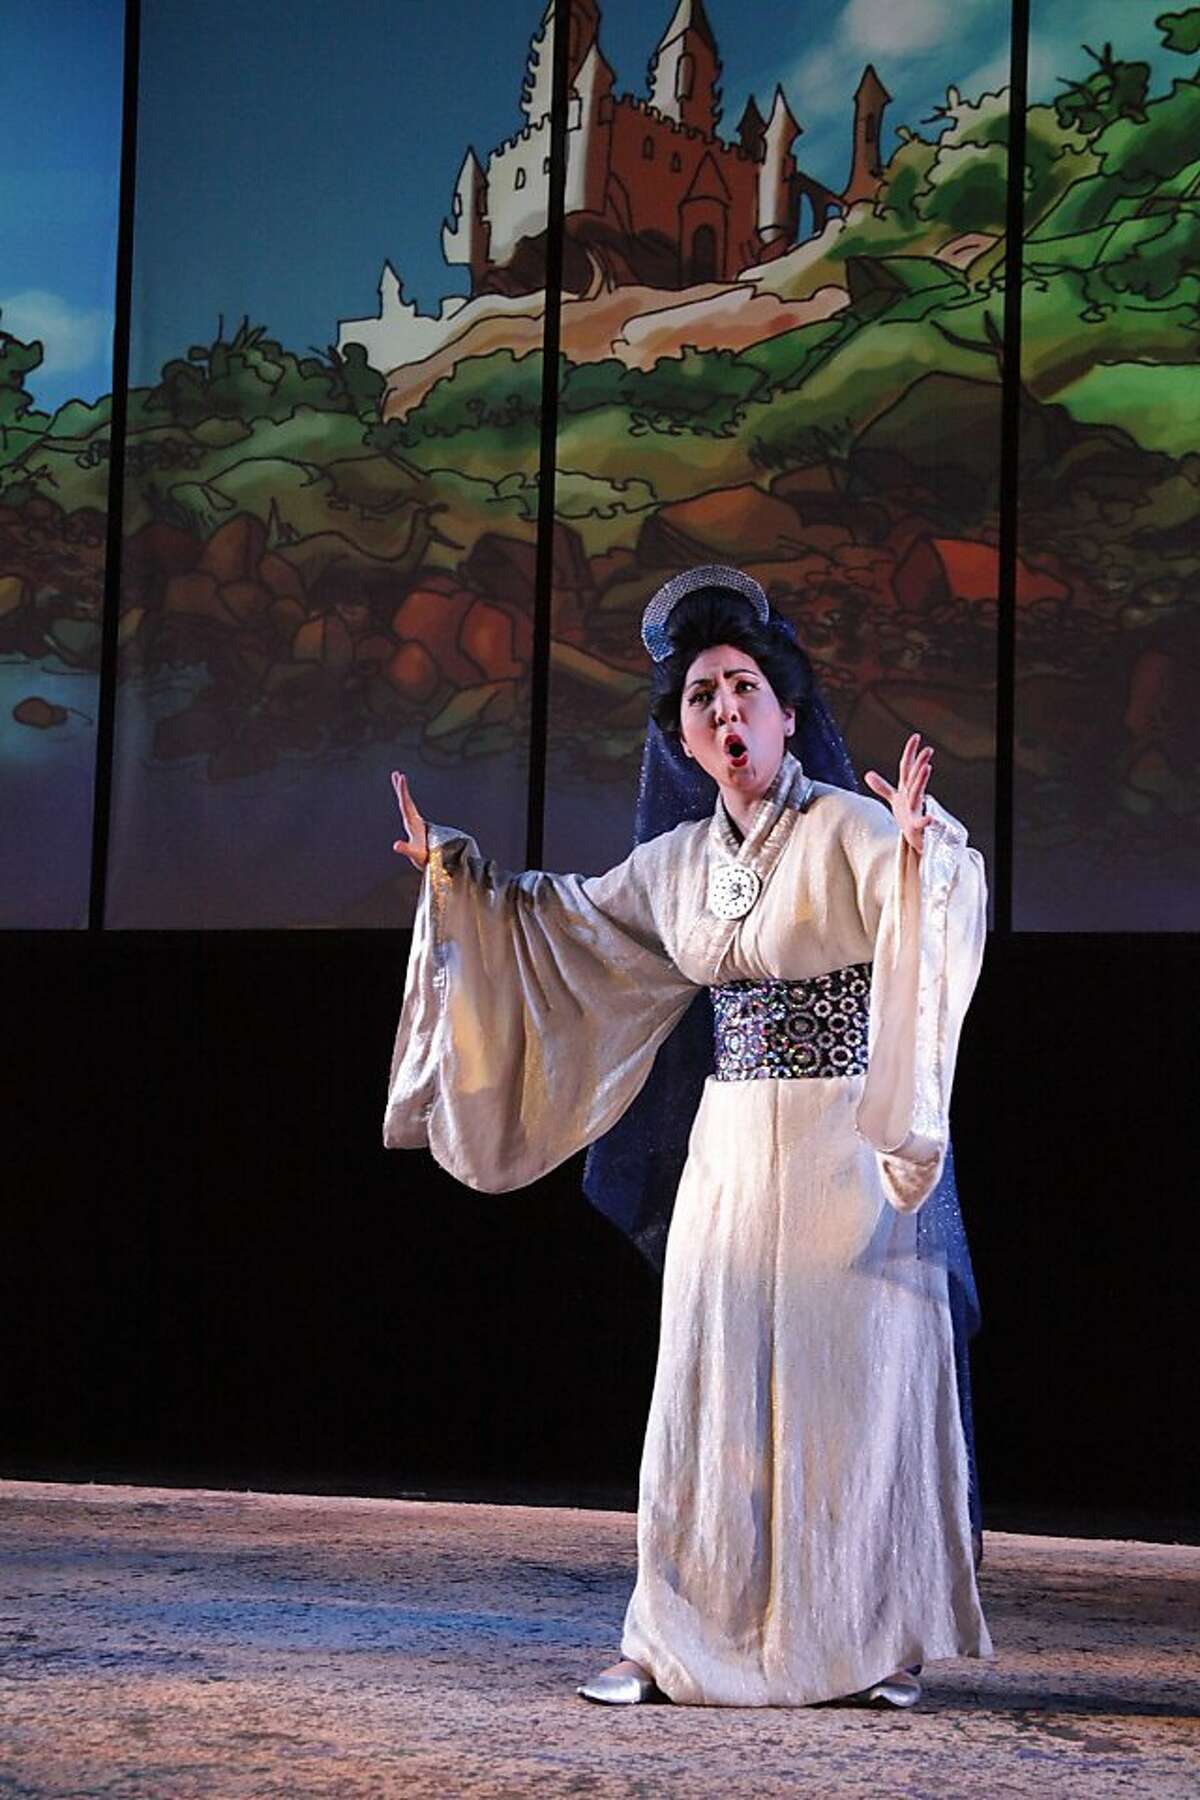 Elyse Nakajima as Queen Starfire (The Queen of the Night) in "The Manga Flute" at West Edge Opera